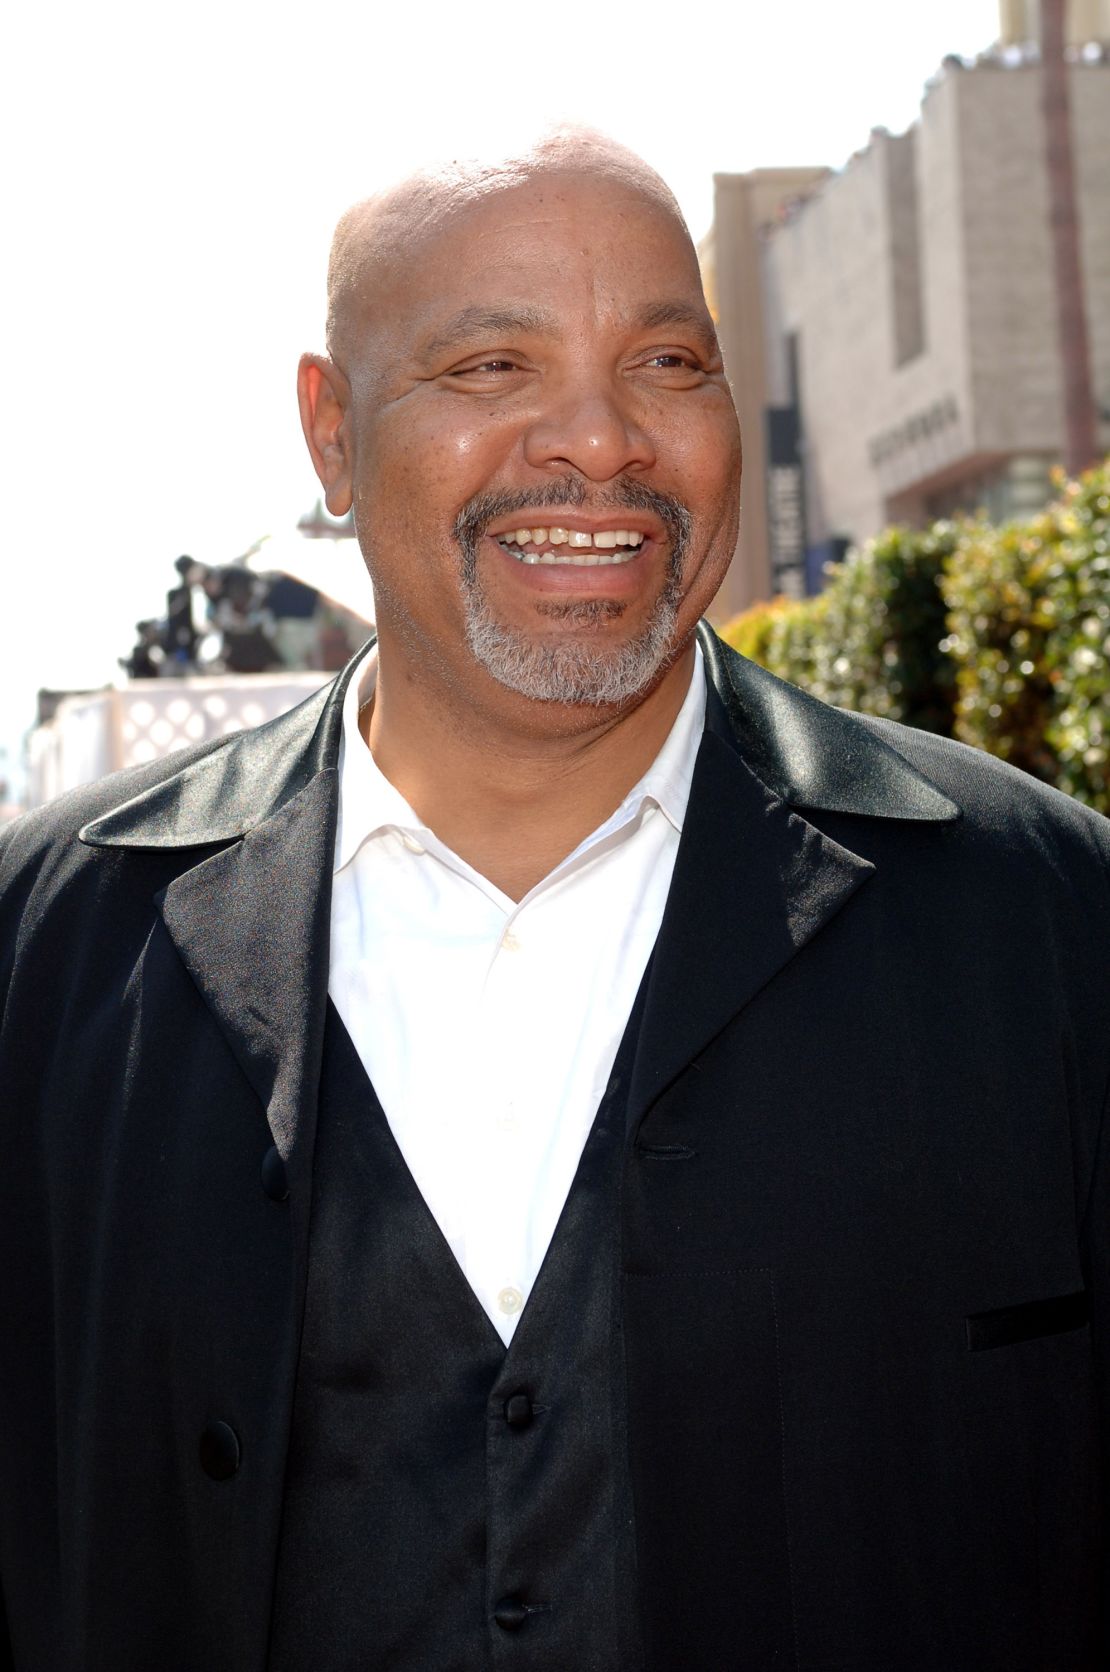 James Avery is best known for "The Fresh Prince of Bel-Air."